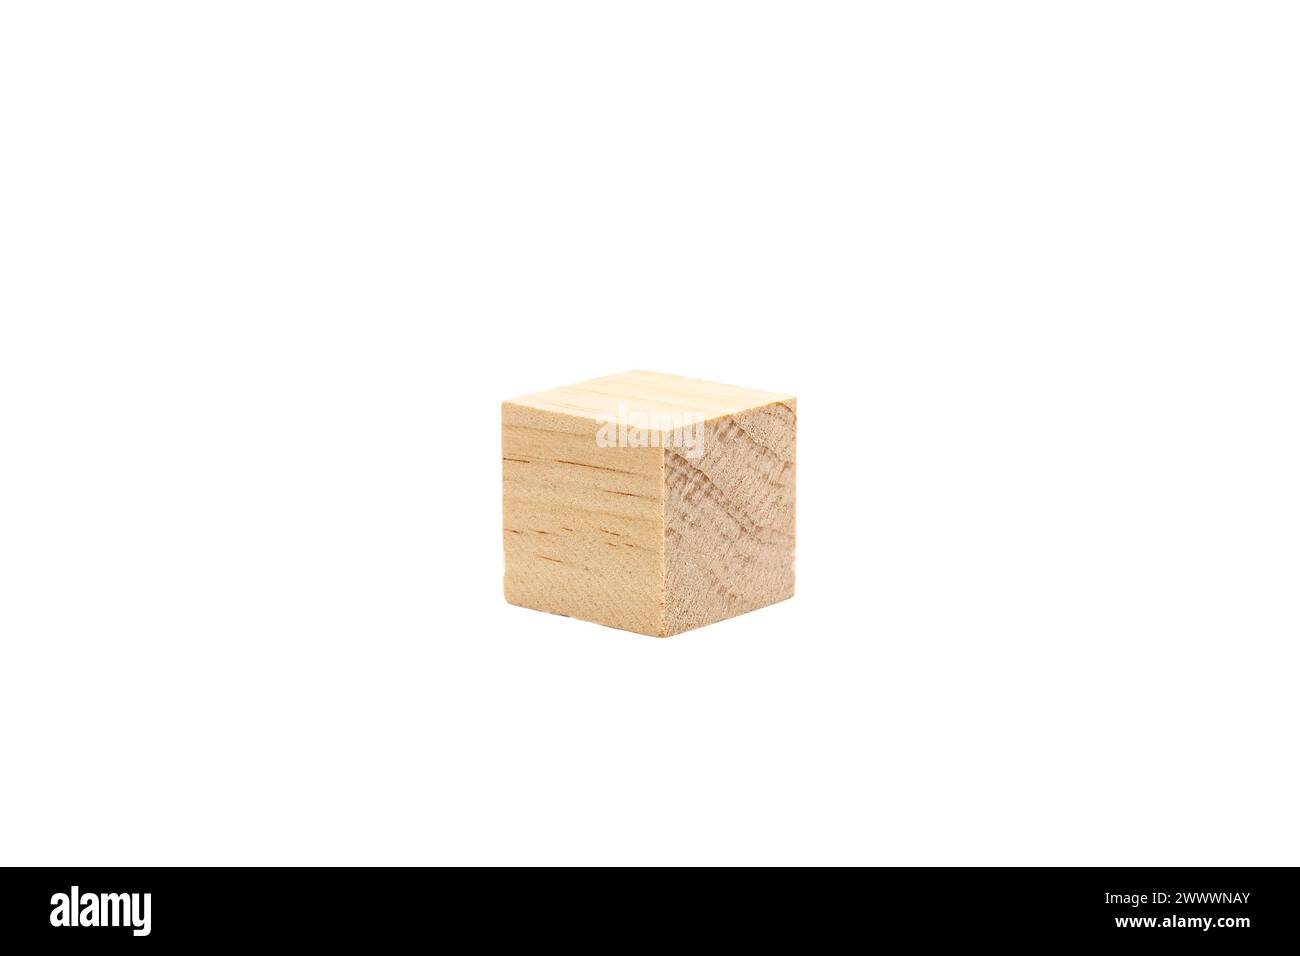 A plain wooden cube isolated on a white backdrop. Stock Photo